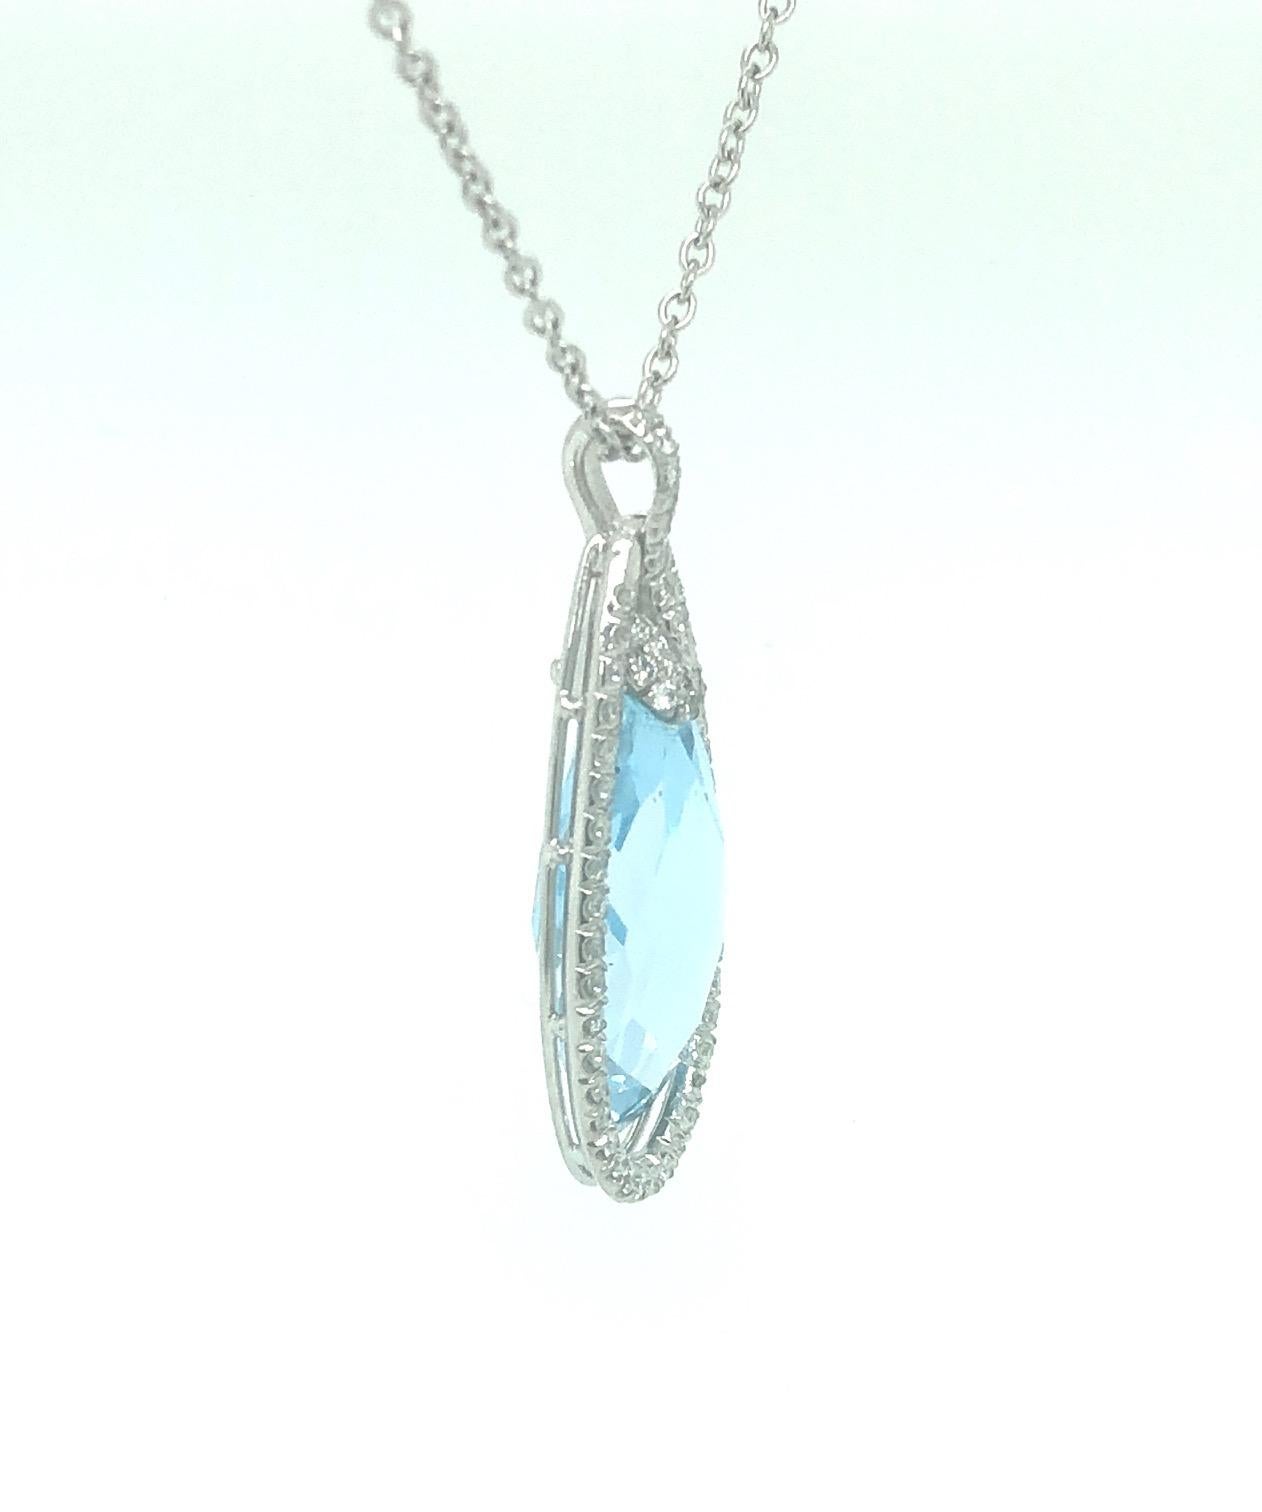 Diamond and Sky Blue Pear Topaz Pendant 

Total Carat Weight of Diamonds 0.50 carat

F/G Color VS Clarity

Sky Blue Topaz Pear measures  36.0 x 17.0mm

Set in 18K White Gold

With 16.0